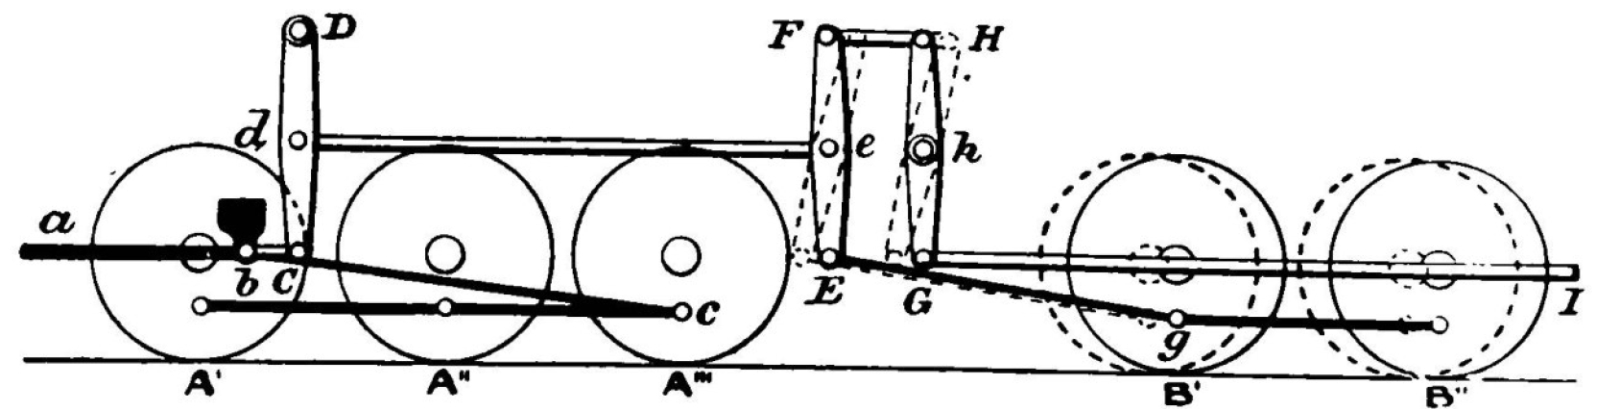 Schematic representation of the mechanics according to the Hagans system